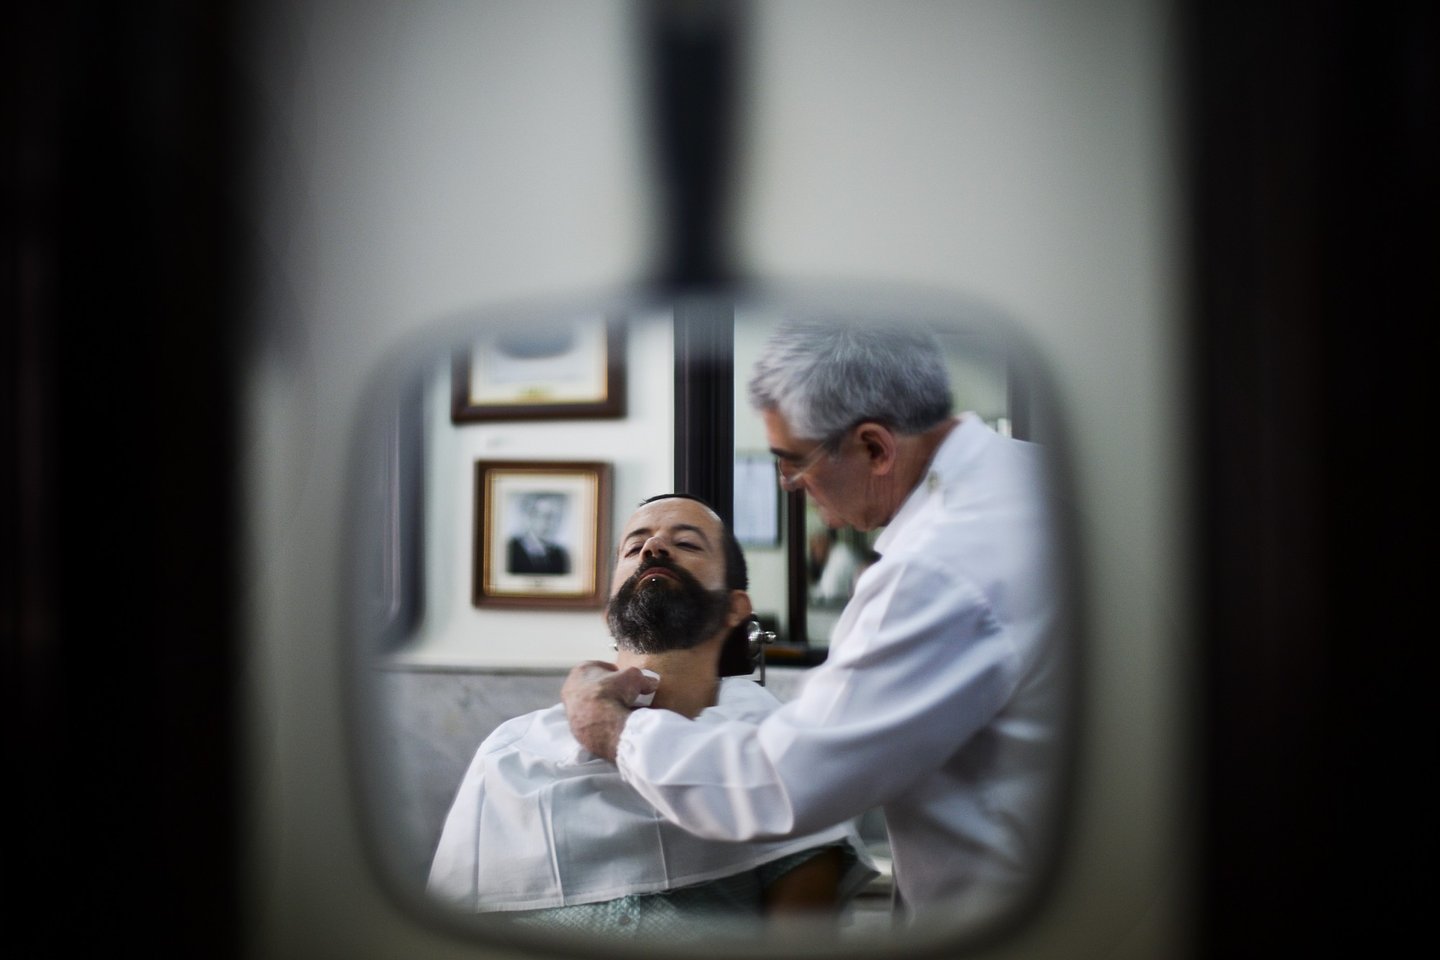 A barber shaves the beard of a customer at the barber shop "Barbearia Campos", open since 1886, in Lisbon on July 16, 2013. AFP PHOTO/ PATRICIA DE MELO MOREIRA (Photo credit should read PATRICIA DE MELO MOREIRA/AFP/Getty Images)